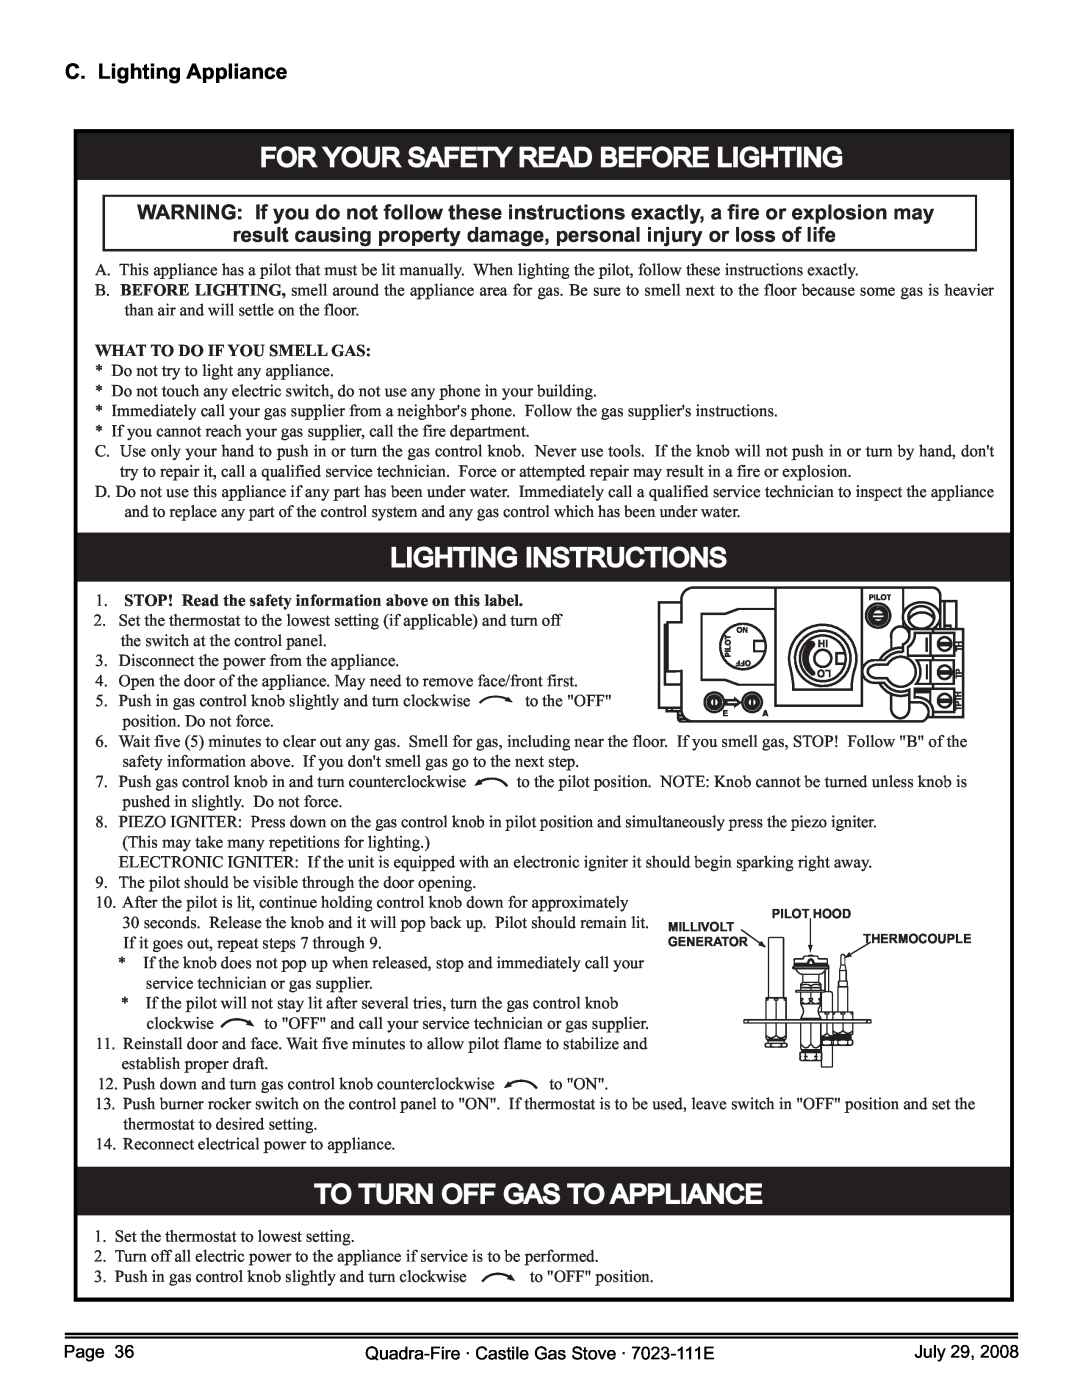 Quadra-Fire CASTILE-GAS-MBK, 7023-111E C. Lighting Appliance, For Your Safety Read Before Lighting, Lighting Instructions 